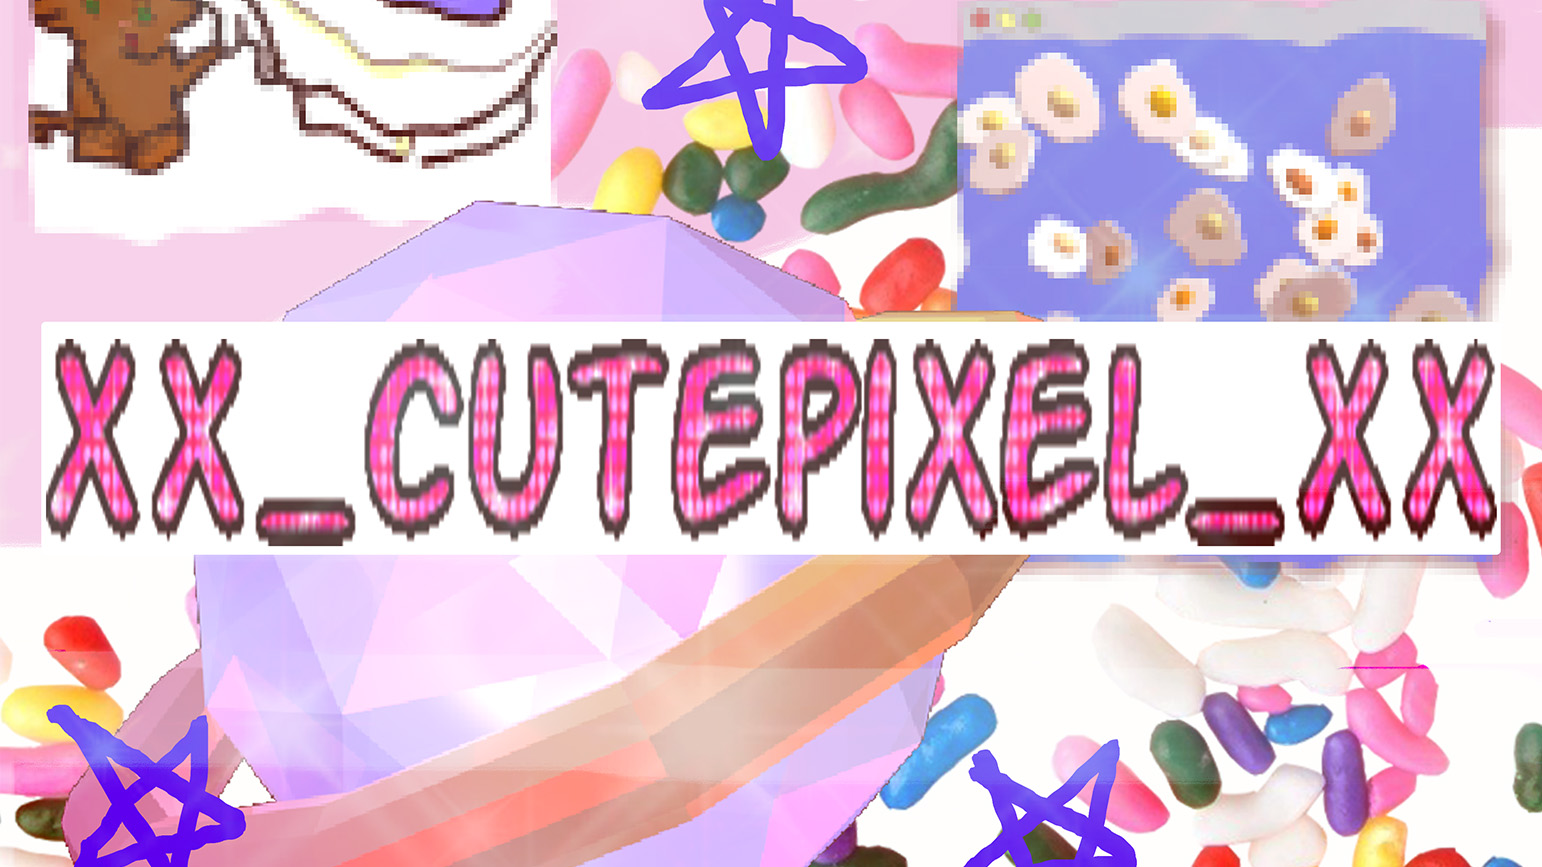 Pixelated graphic with bright colors and the exhibition title "xX_CutePixel_Xx"